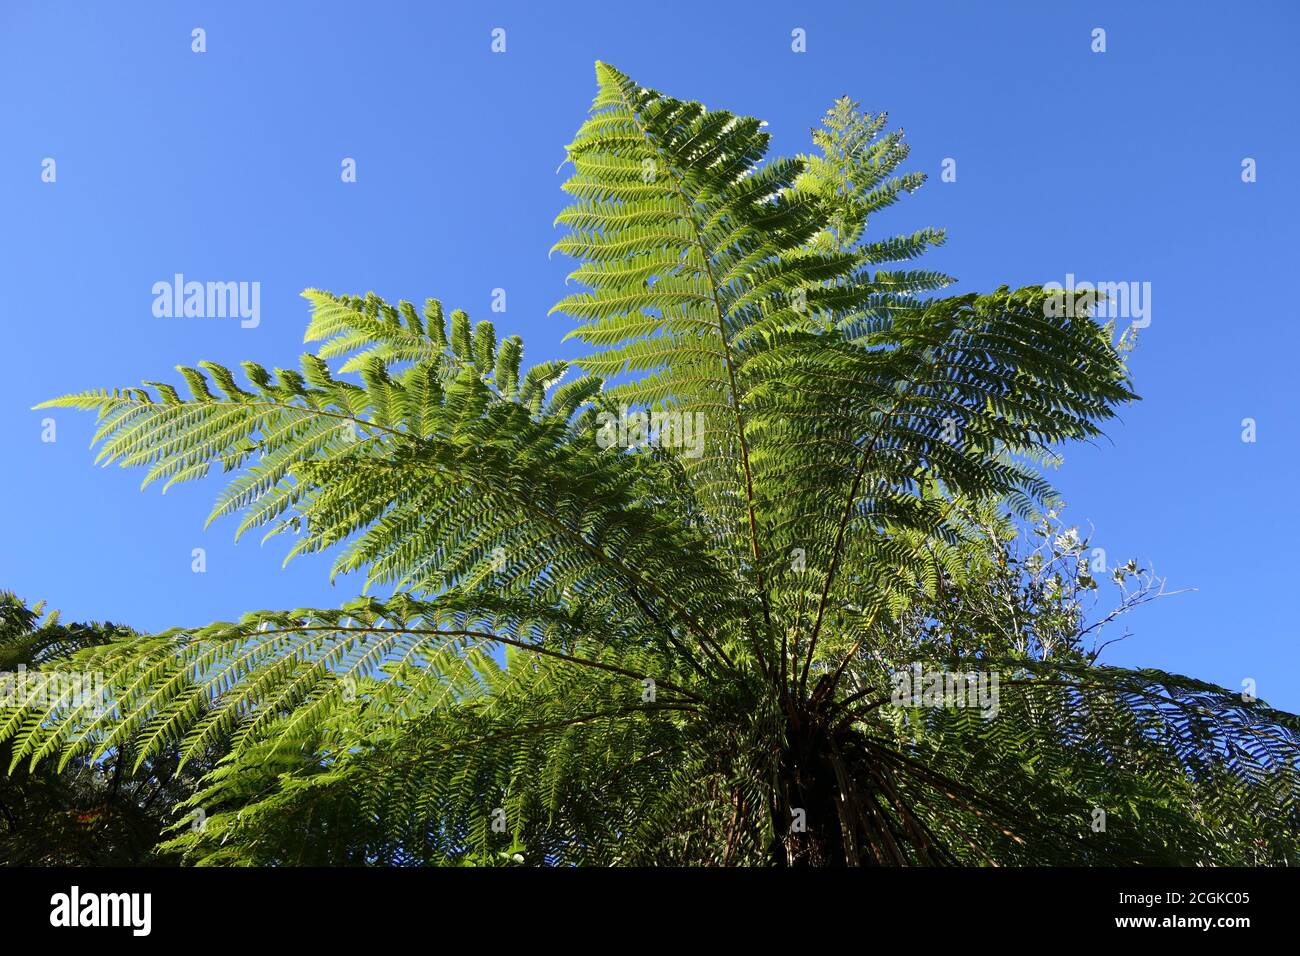 Fern leaves against blue sky or top of a fern tree Stock Photo